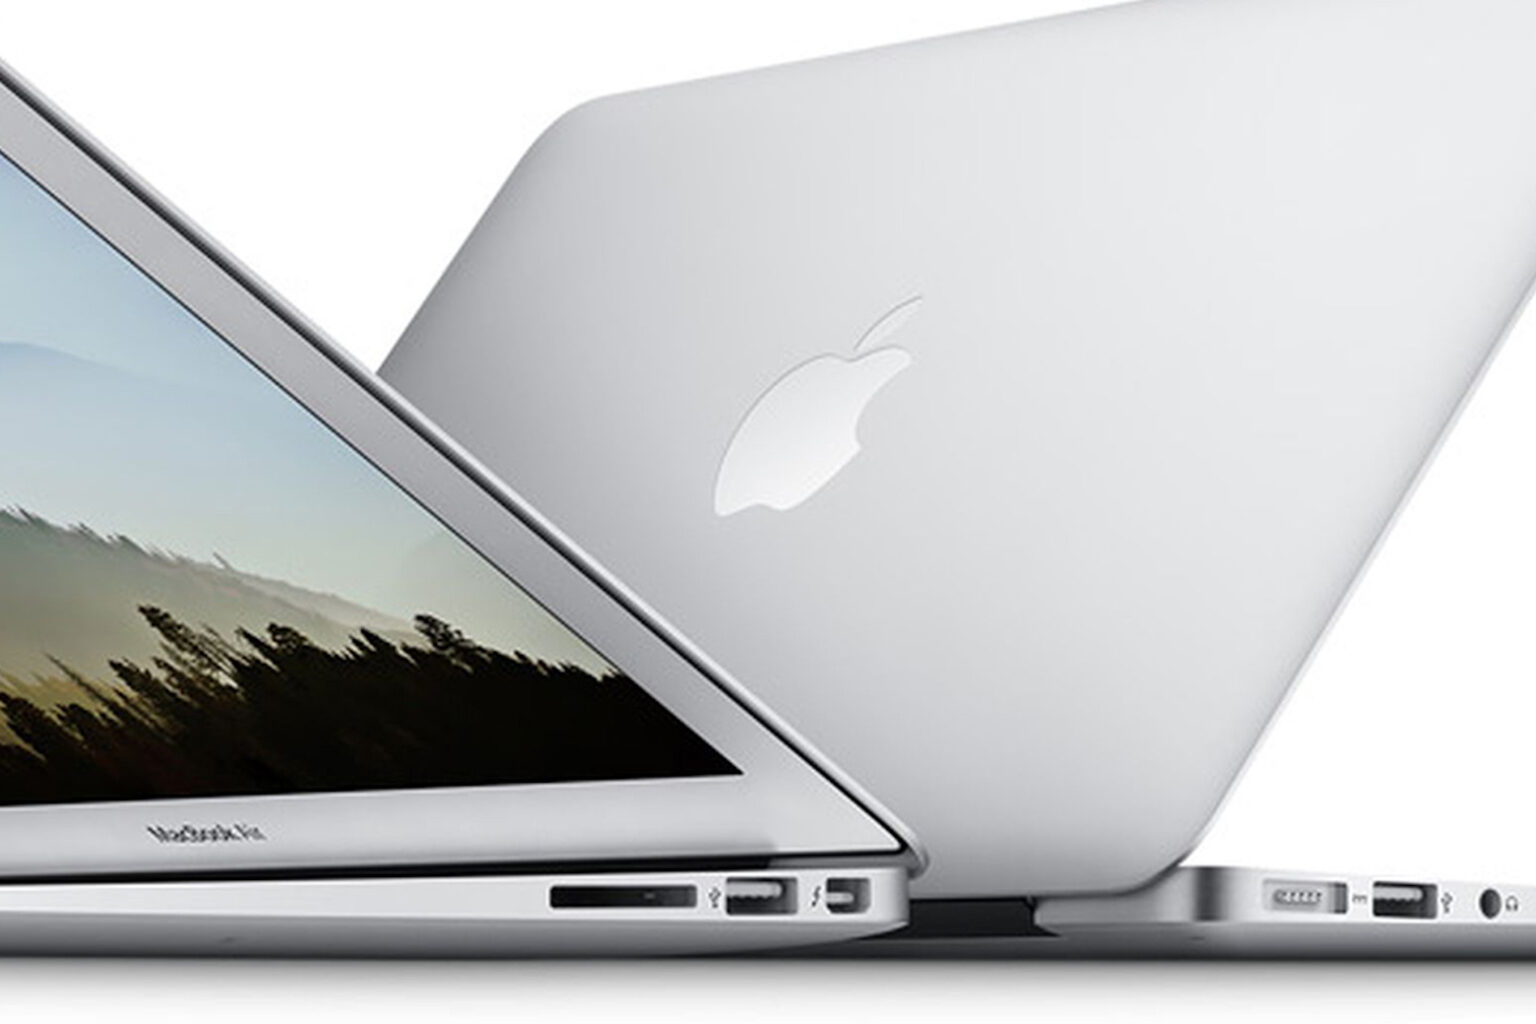 Looking to save ahead of back to school? This refurbished MacBook Air is just $299.99.